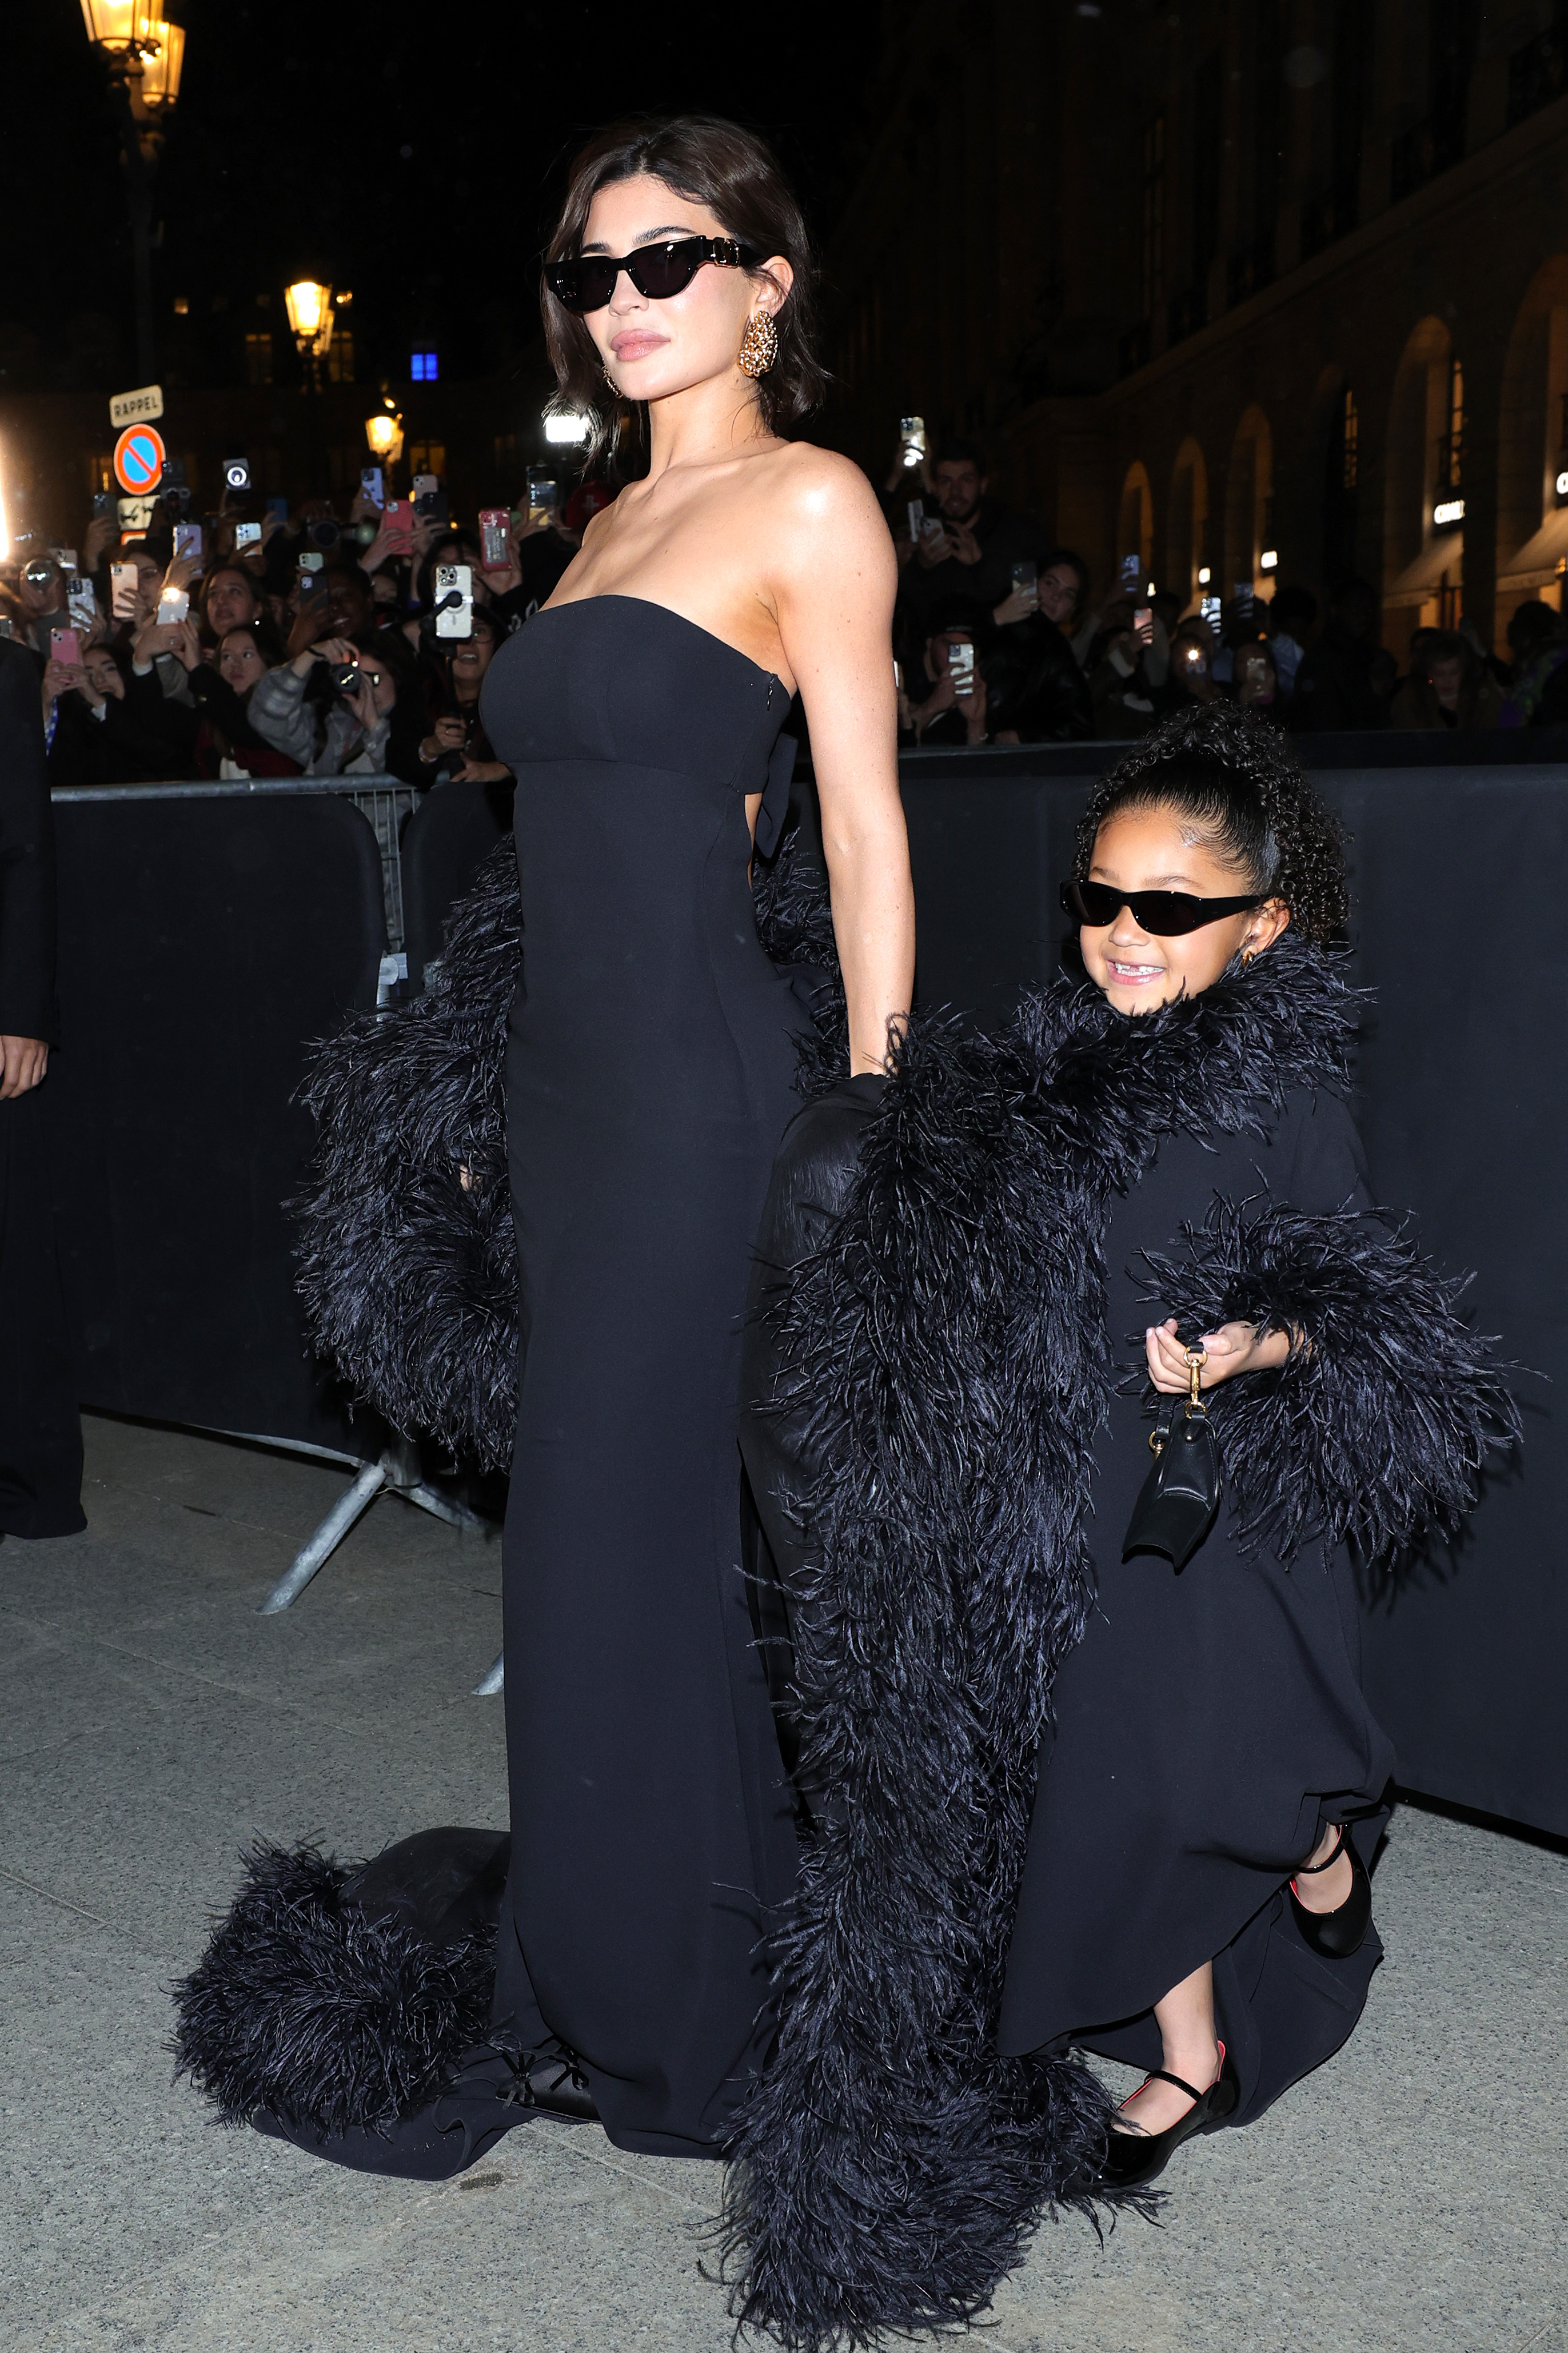 She also sported a black skintight strapless gown, matching her daughter Stormi